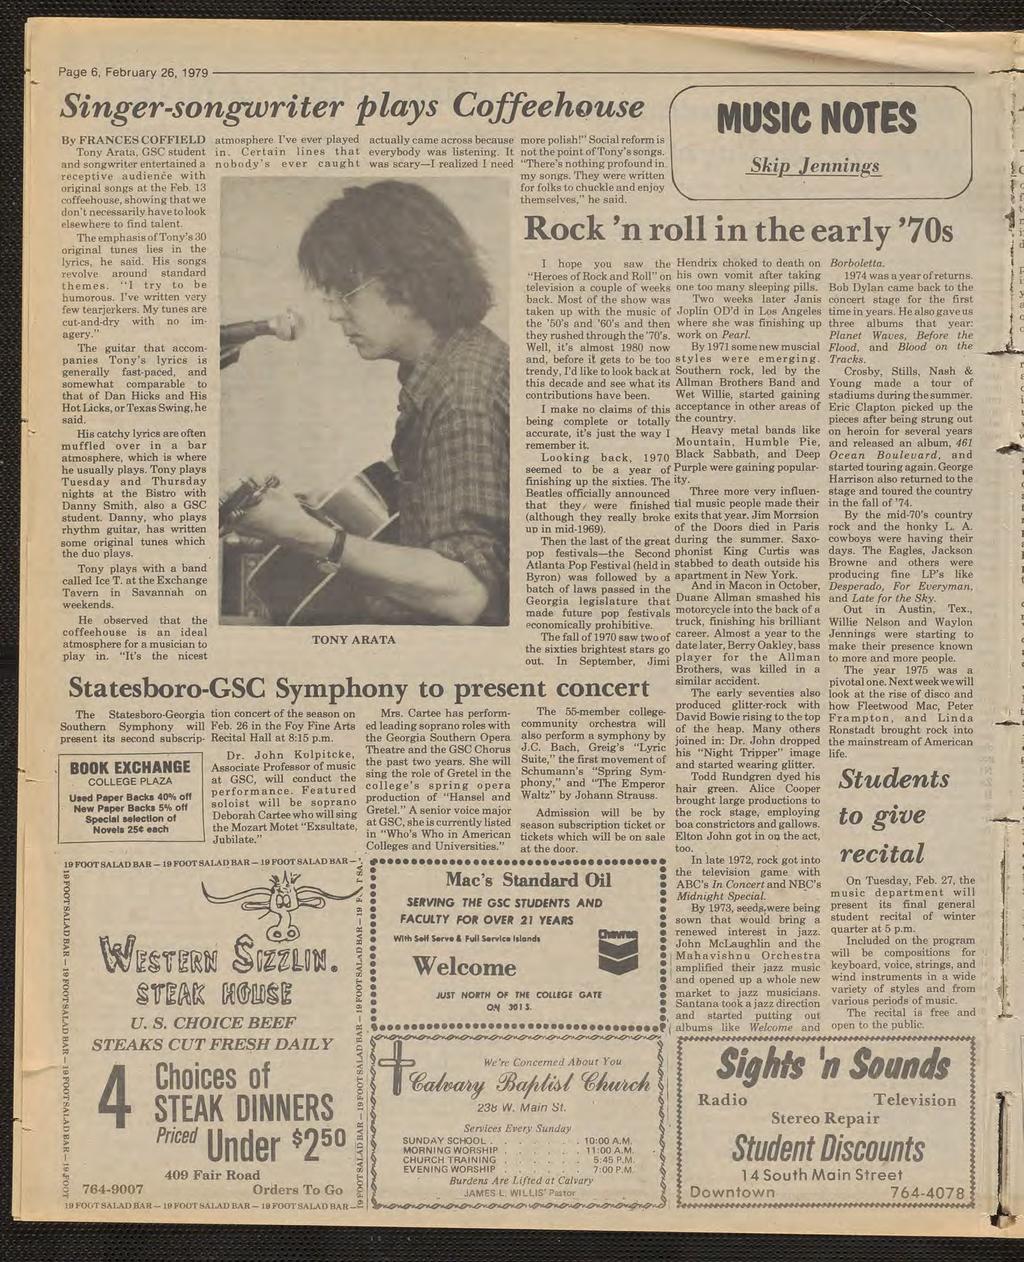 1 Page 6, February 26, 1979 Snger-songwrter plays Coffeehouse f Mll MATES By FRANCES COFFIELD Tony Arata, GSC student and songwrter entertaned a receptve audence wth orgnal songs at the Feb.